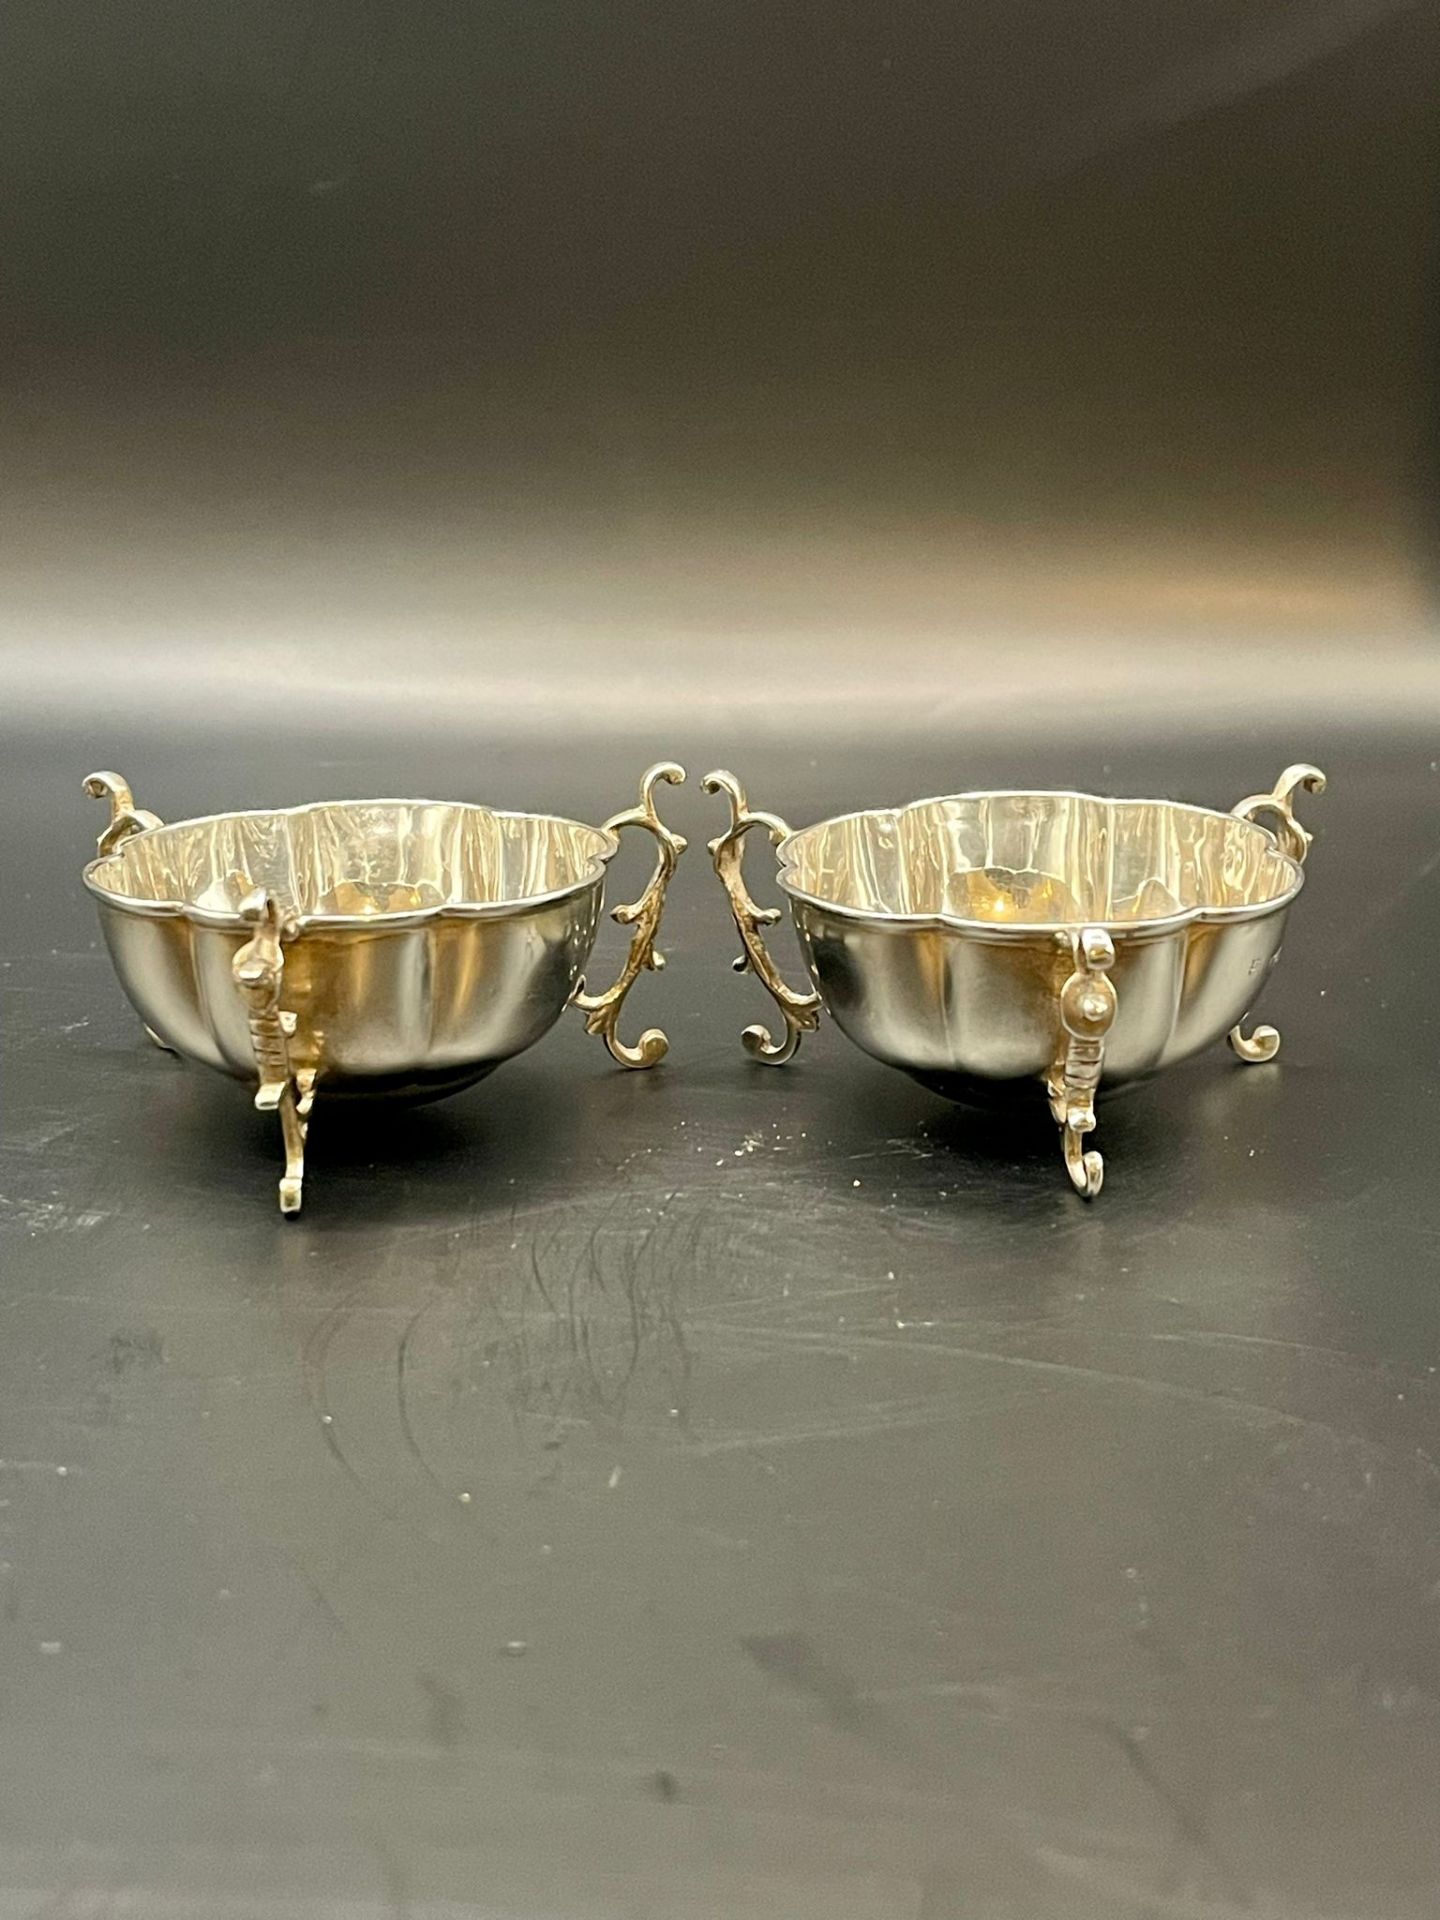 Antique Solid Silver Salt Dishes Fully Hallmarked .- JD over WD in lozenge for James Deakin & Sons J